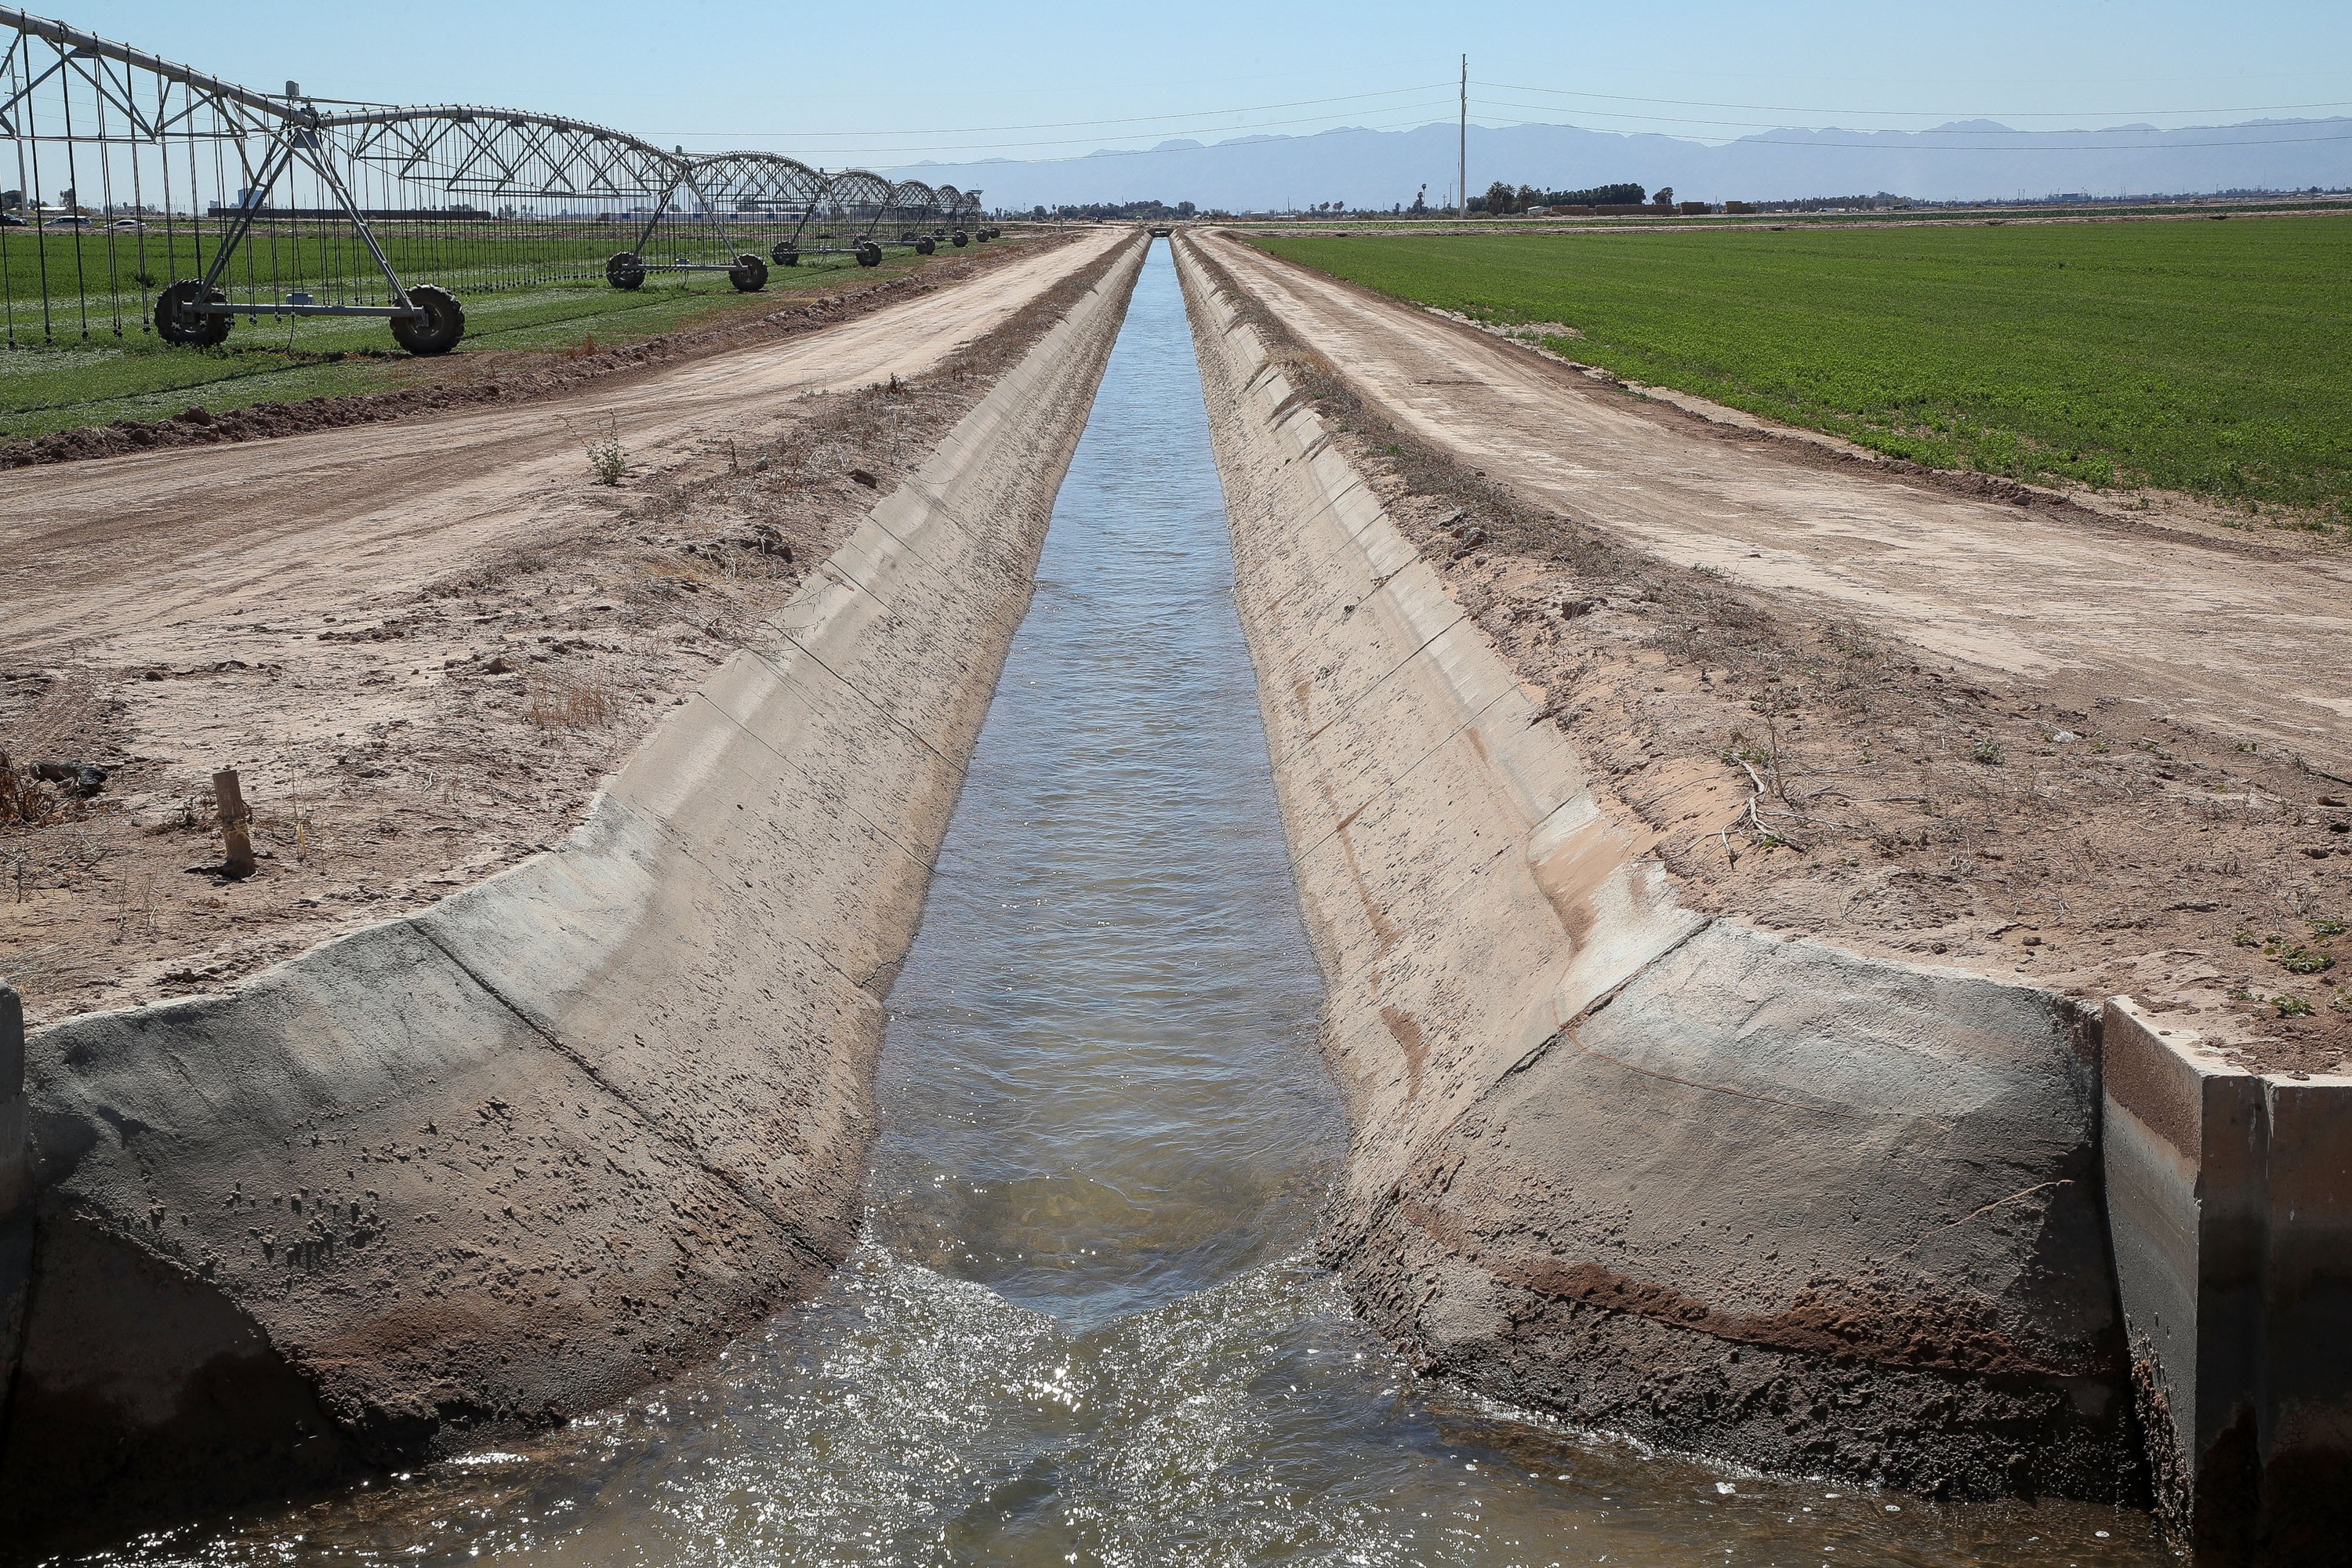 A canal transports water to farmland in the Imperial Valley, California.